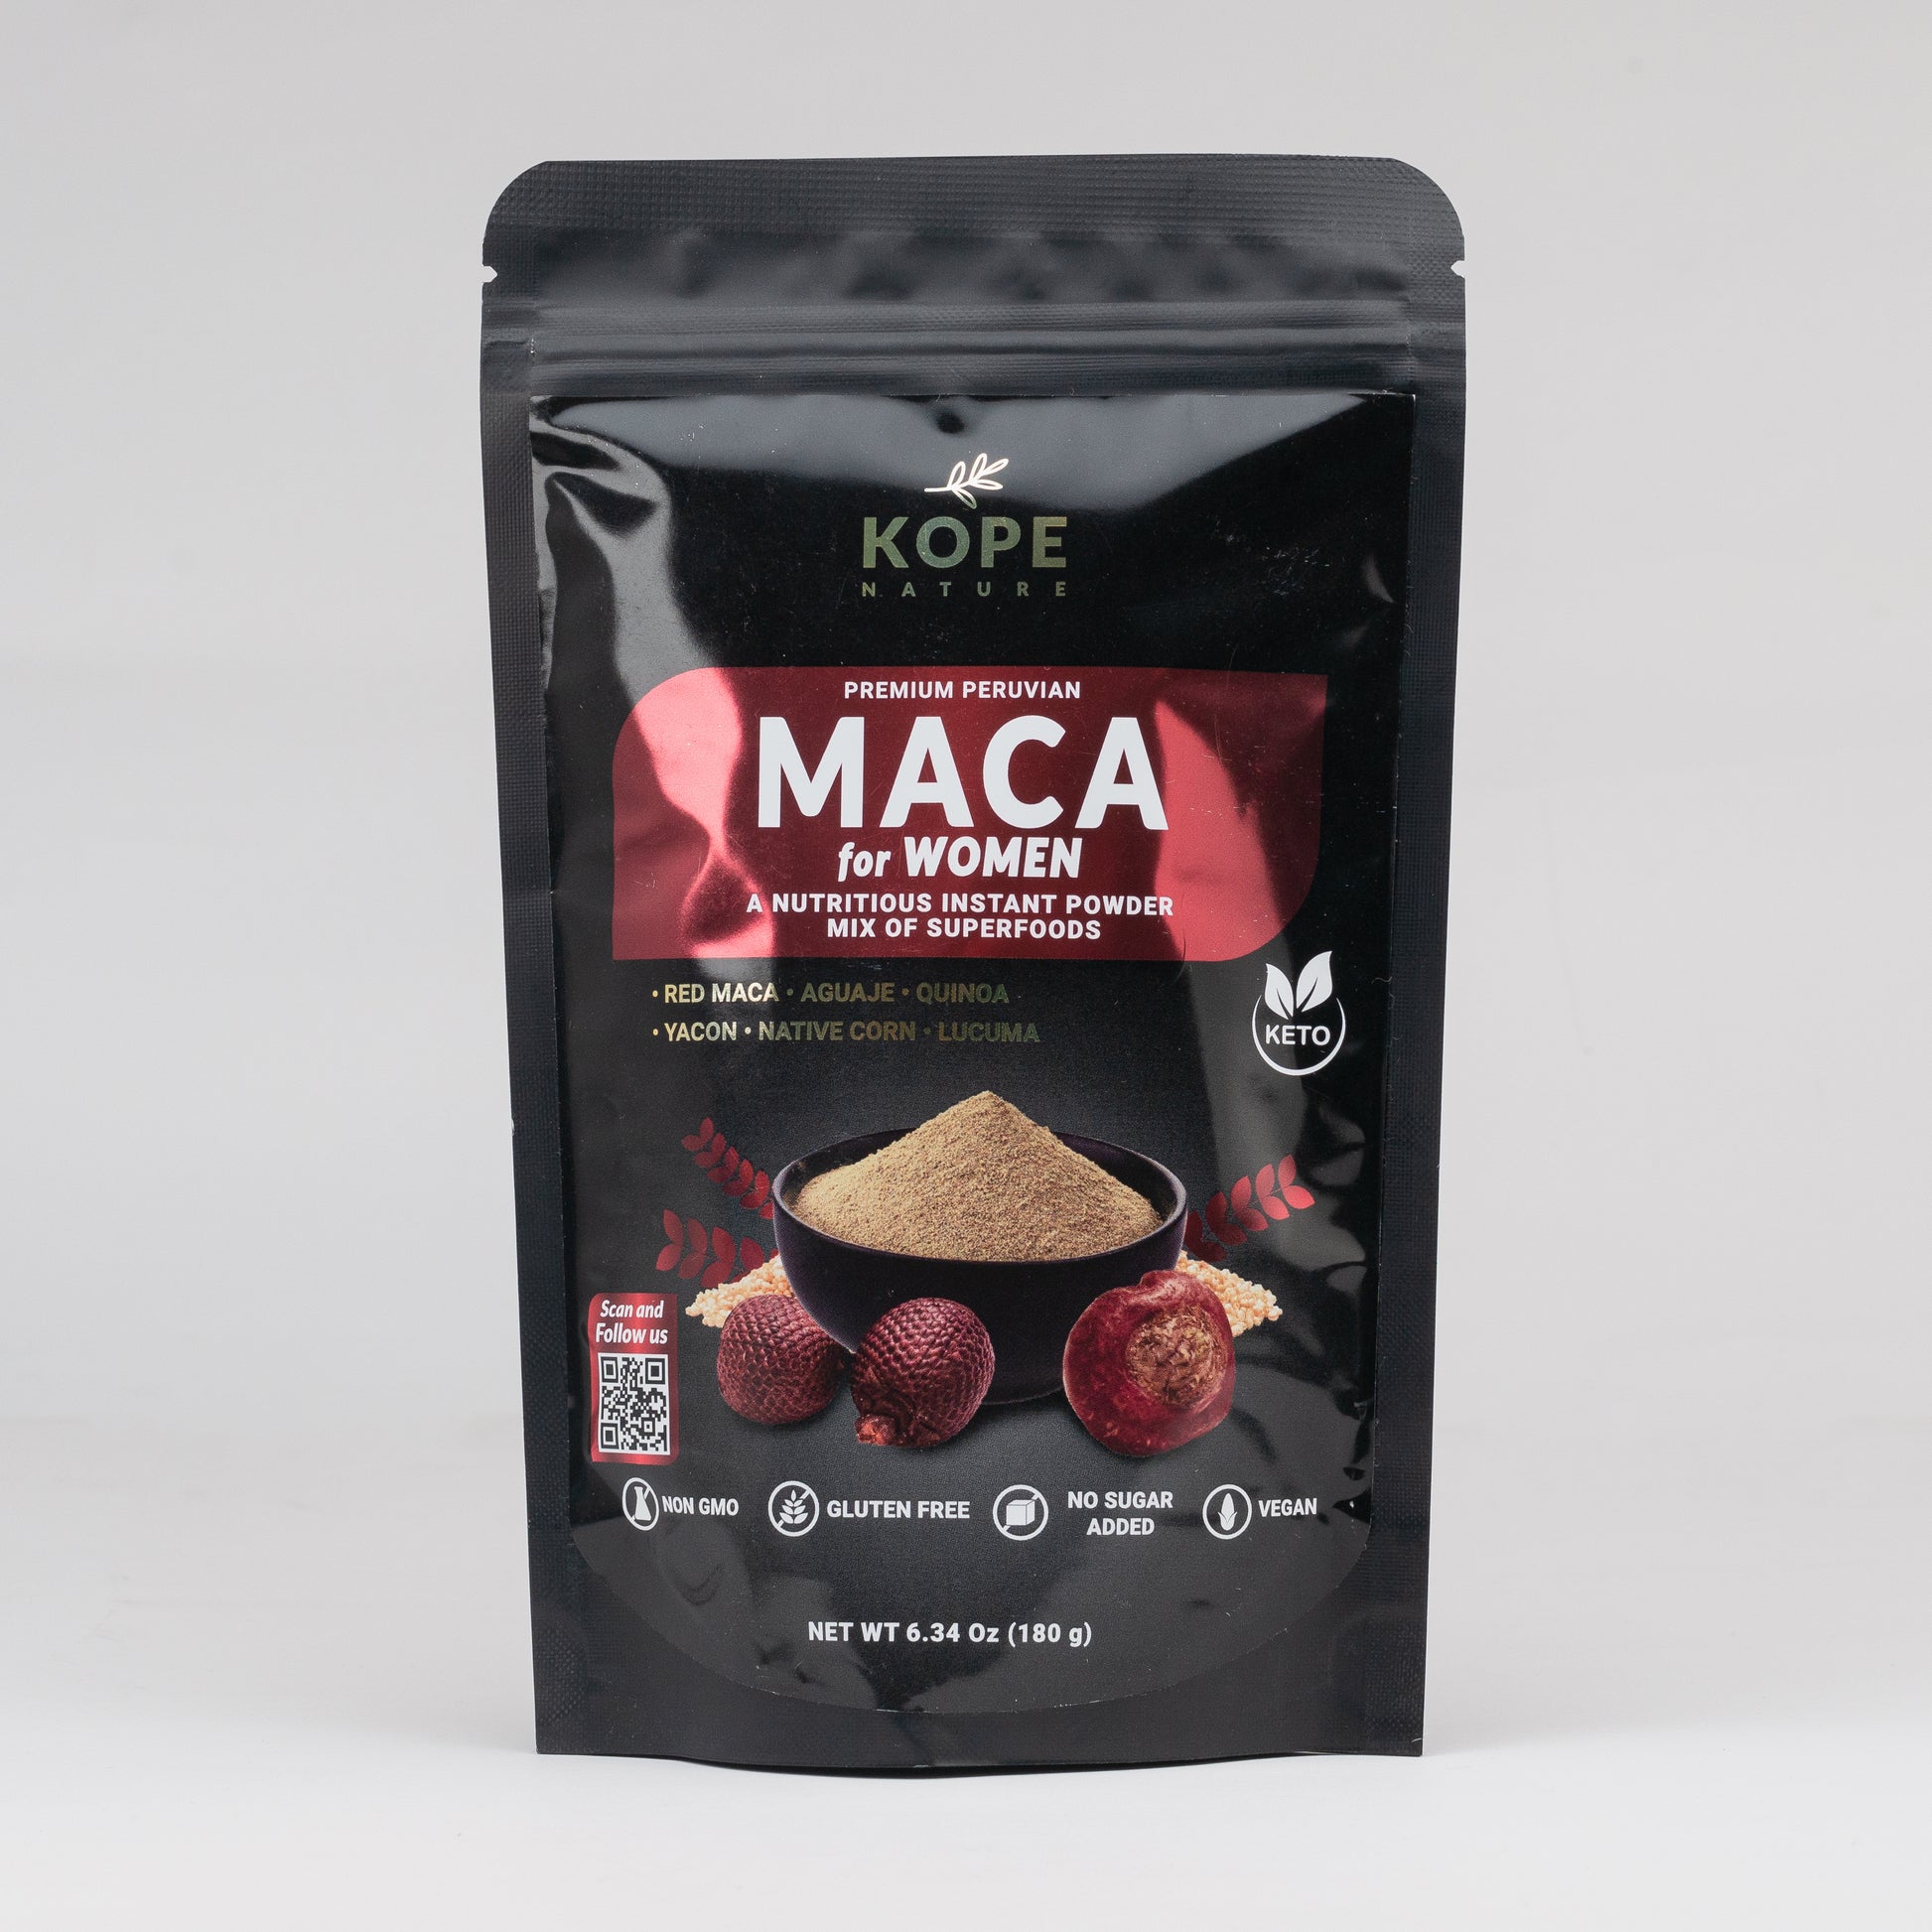 Red Maca Special Nutrion for women